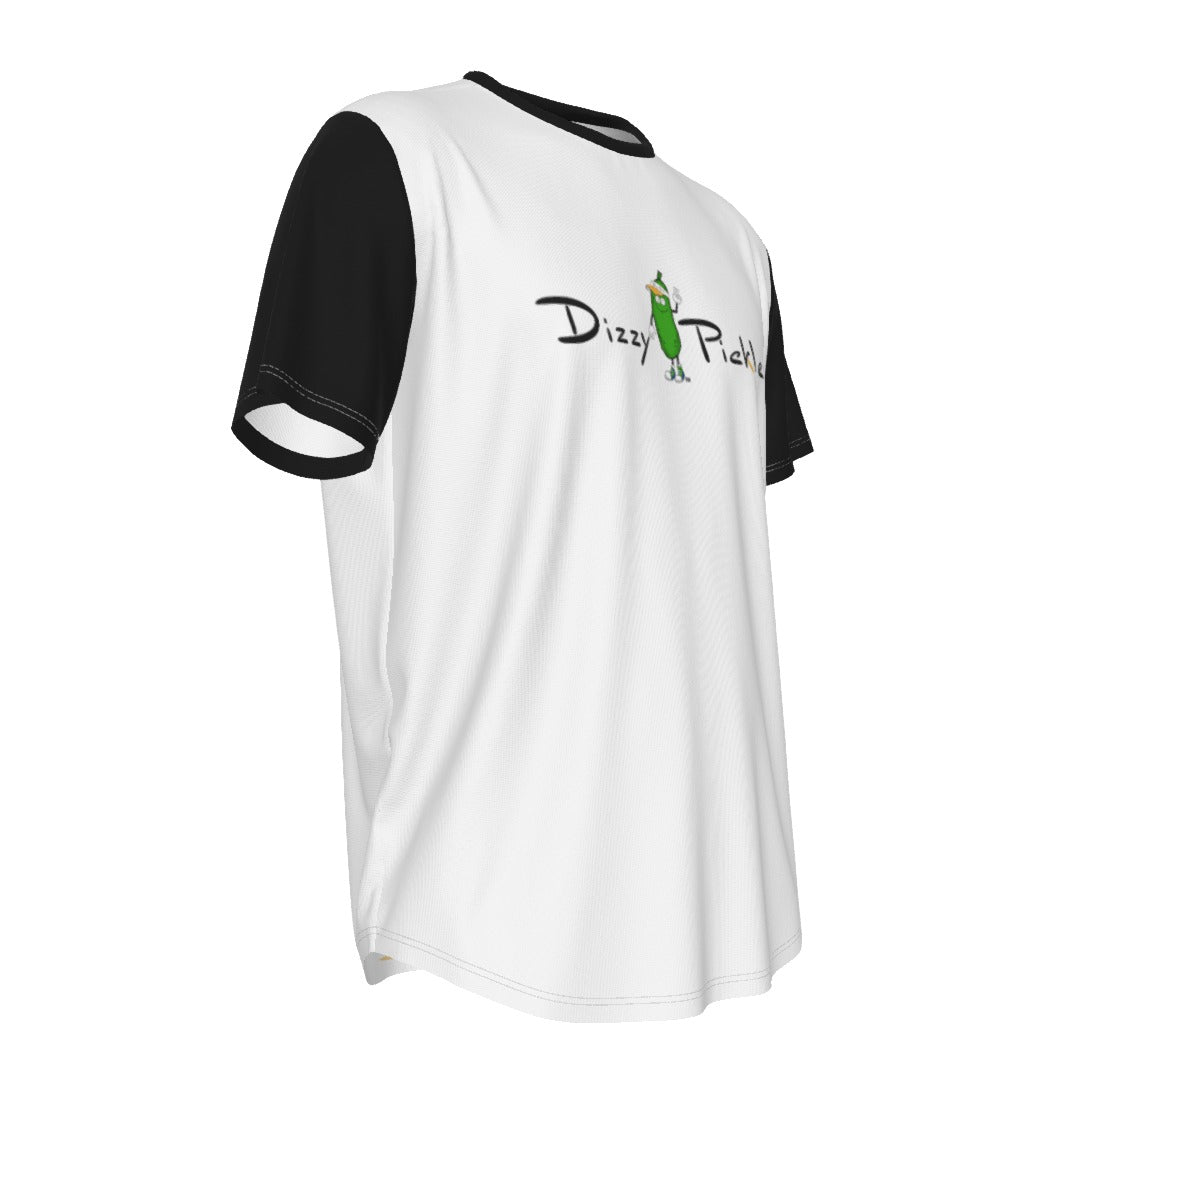 DZY P Classic - White/Black - Men's Short Sleeve Rounded Hem by Dizzy Pickle